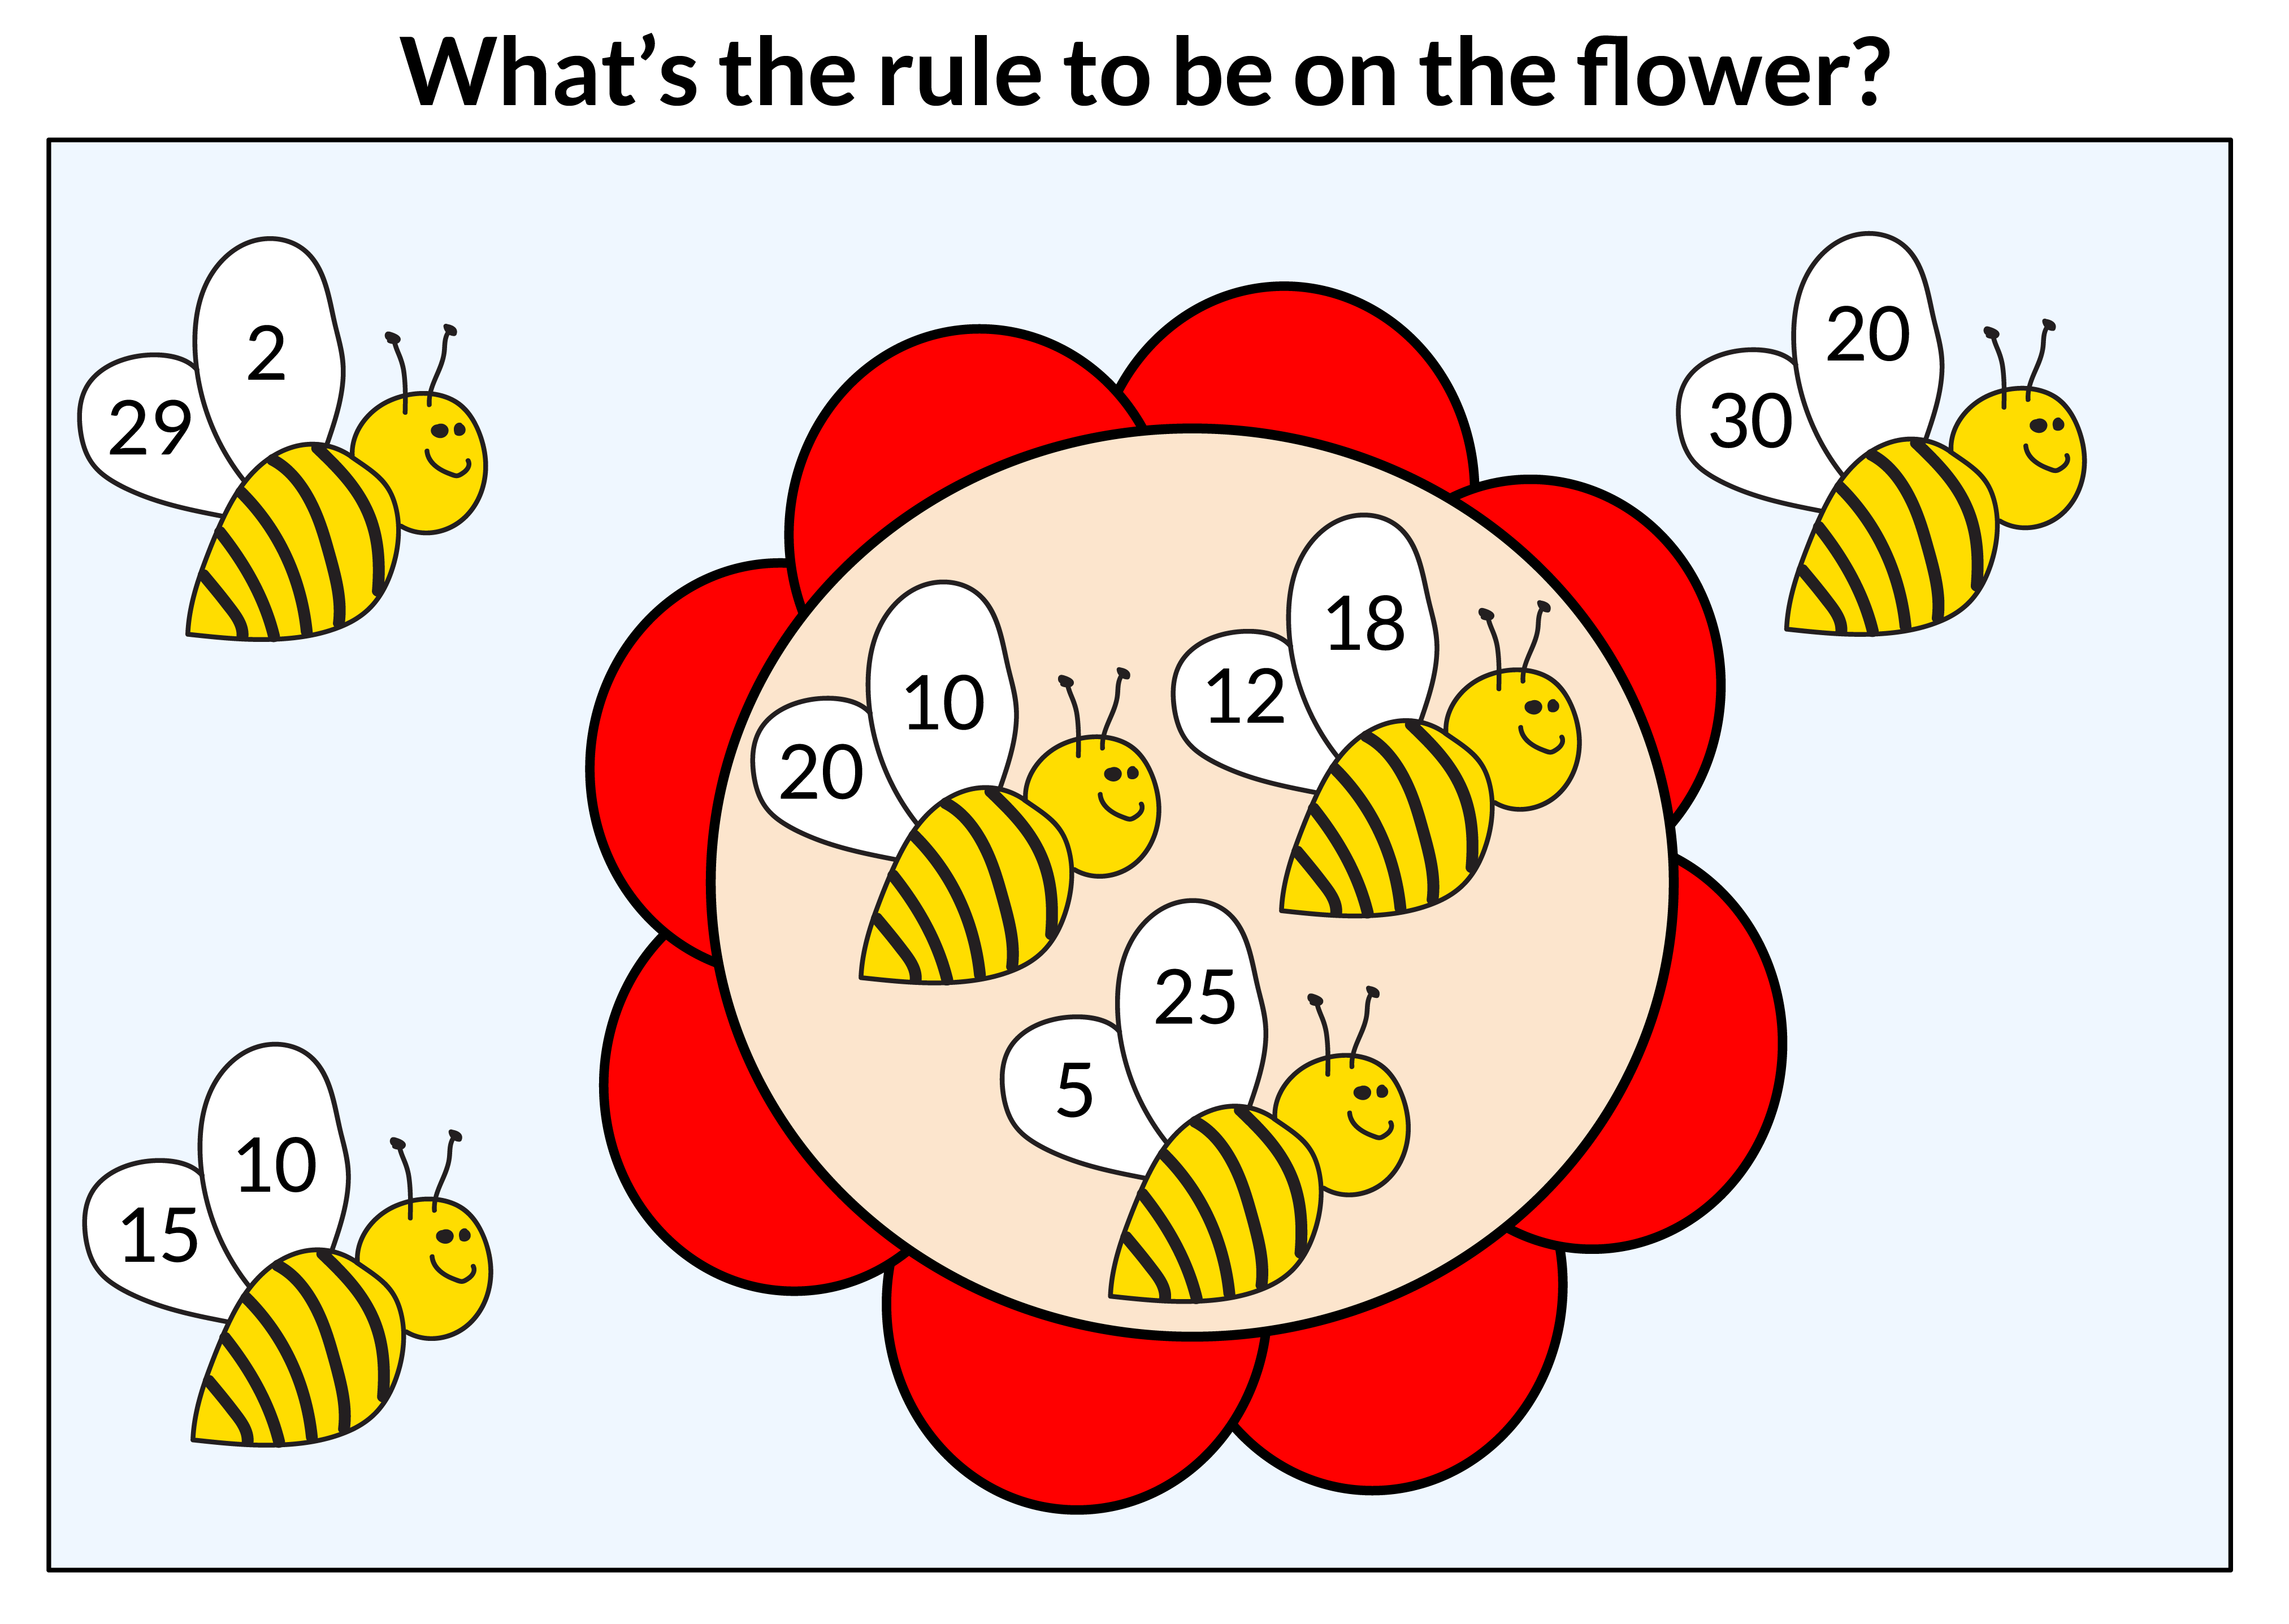 What's the rule to be on the flower? 3 bees are on the flower and 3 are beside the flower. Each bee has 2 wings and each wing shows a number. The bees on the flower have these numbers: 5 and 25. 20 and 10. 12 and 18. The bees beside the flower have these numbers: 15 and 10, 29 and 2, 30 and 20.